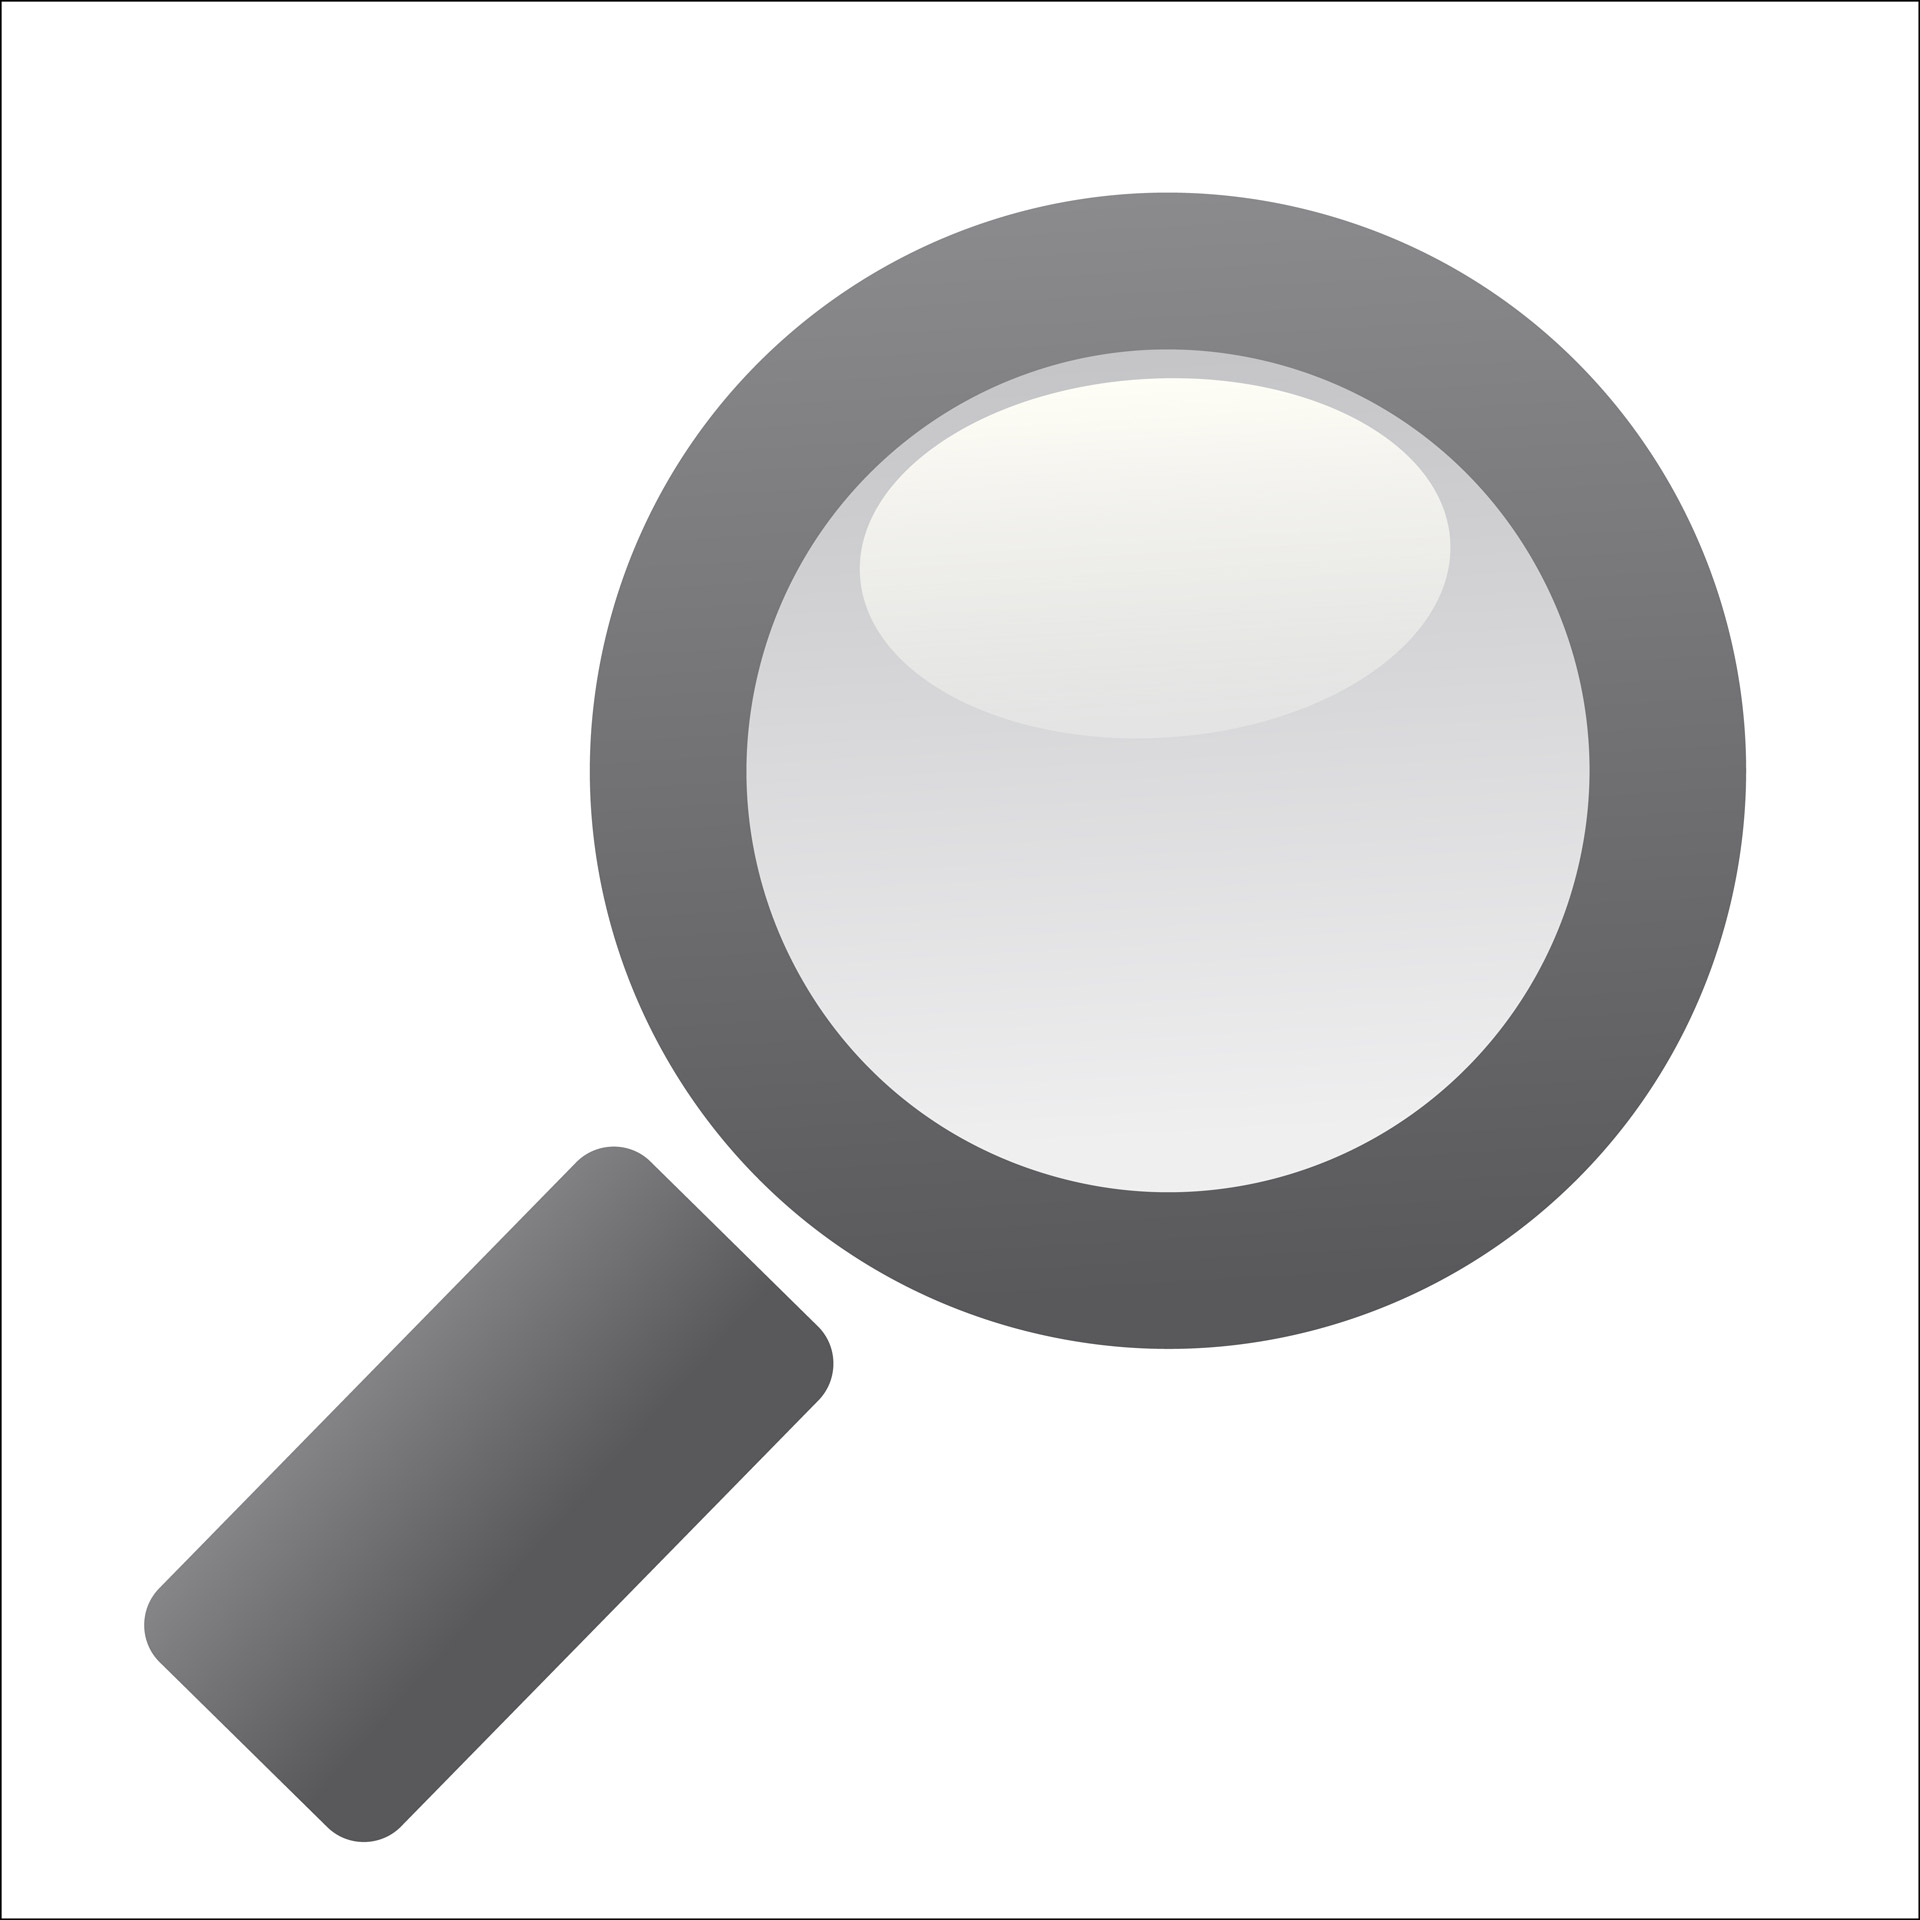 magnifying glass clipart illustration free photo